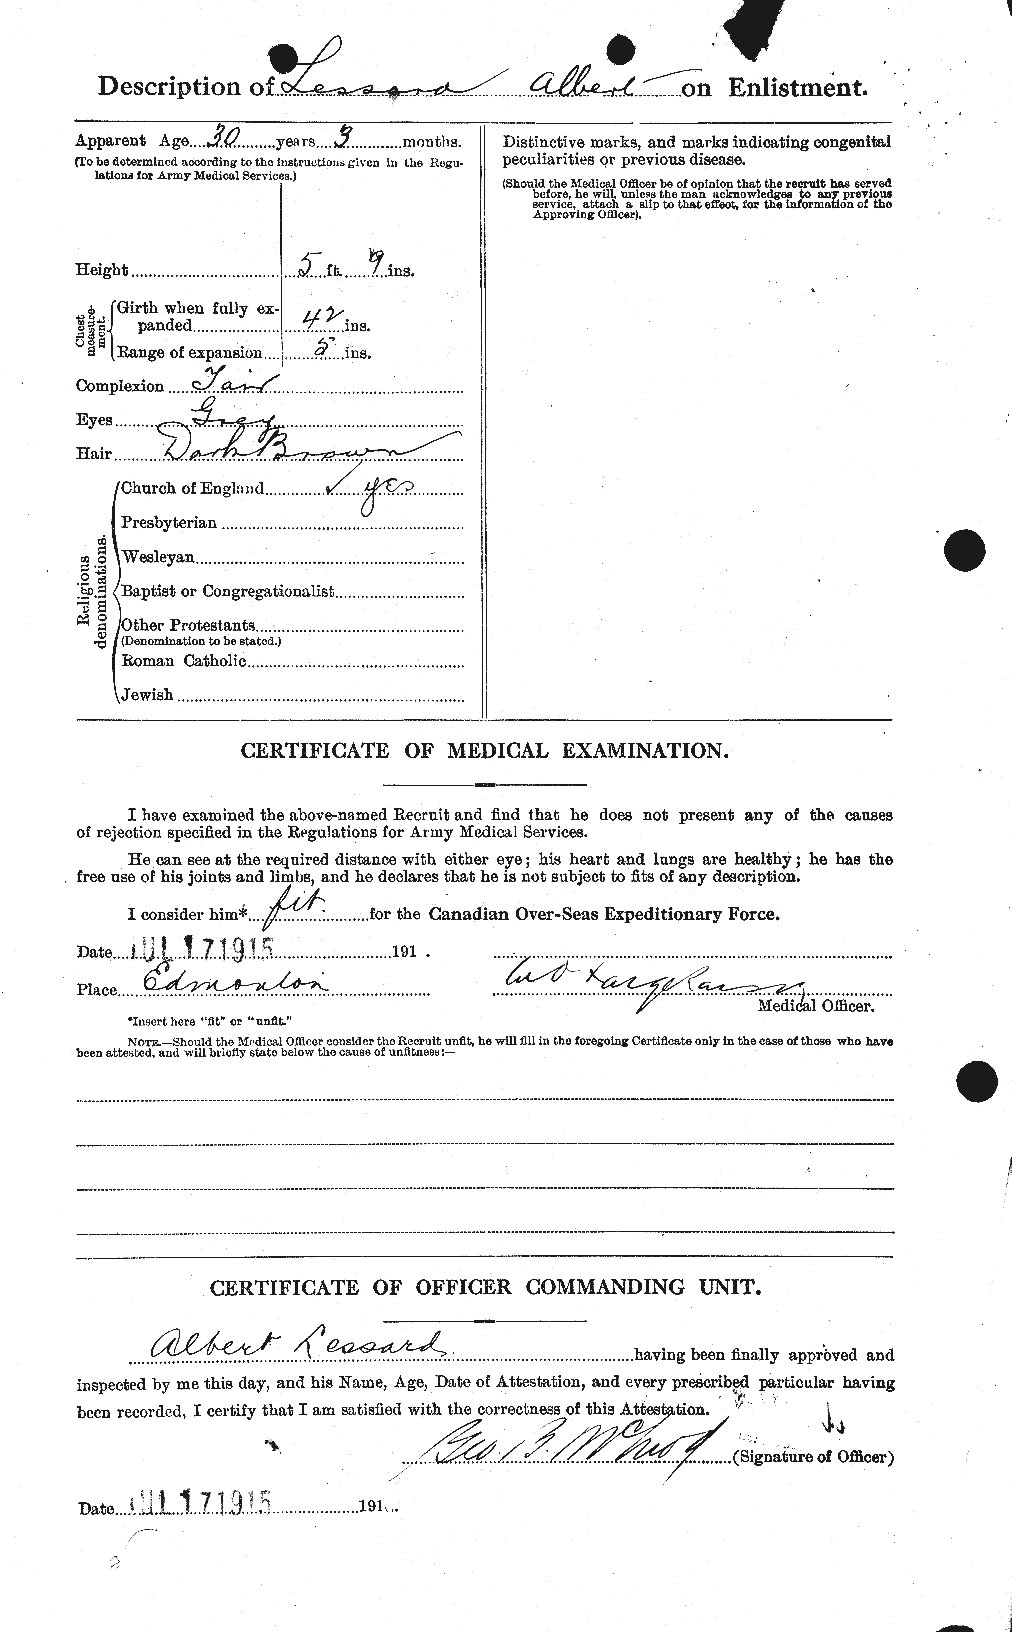 Personnel Records of the First World War - CEF 460410b